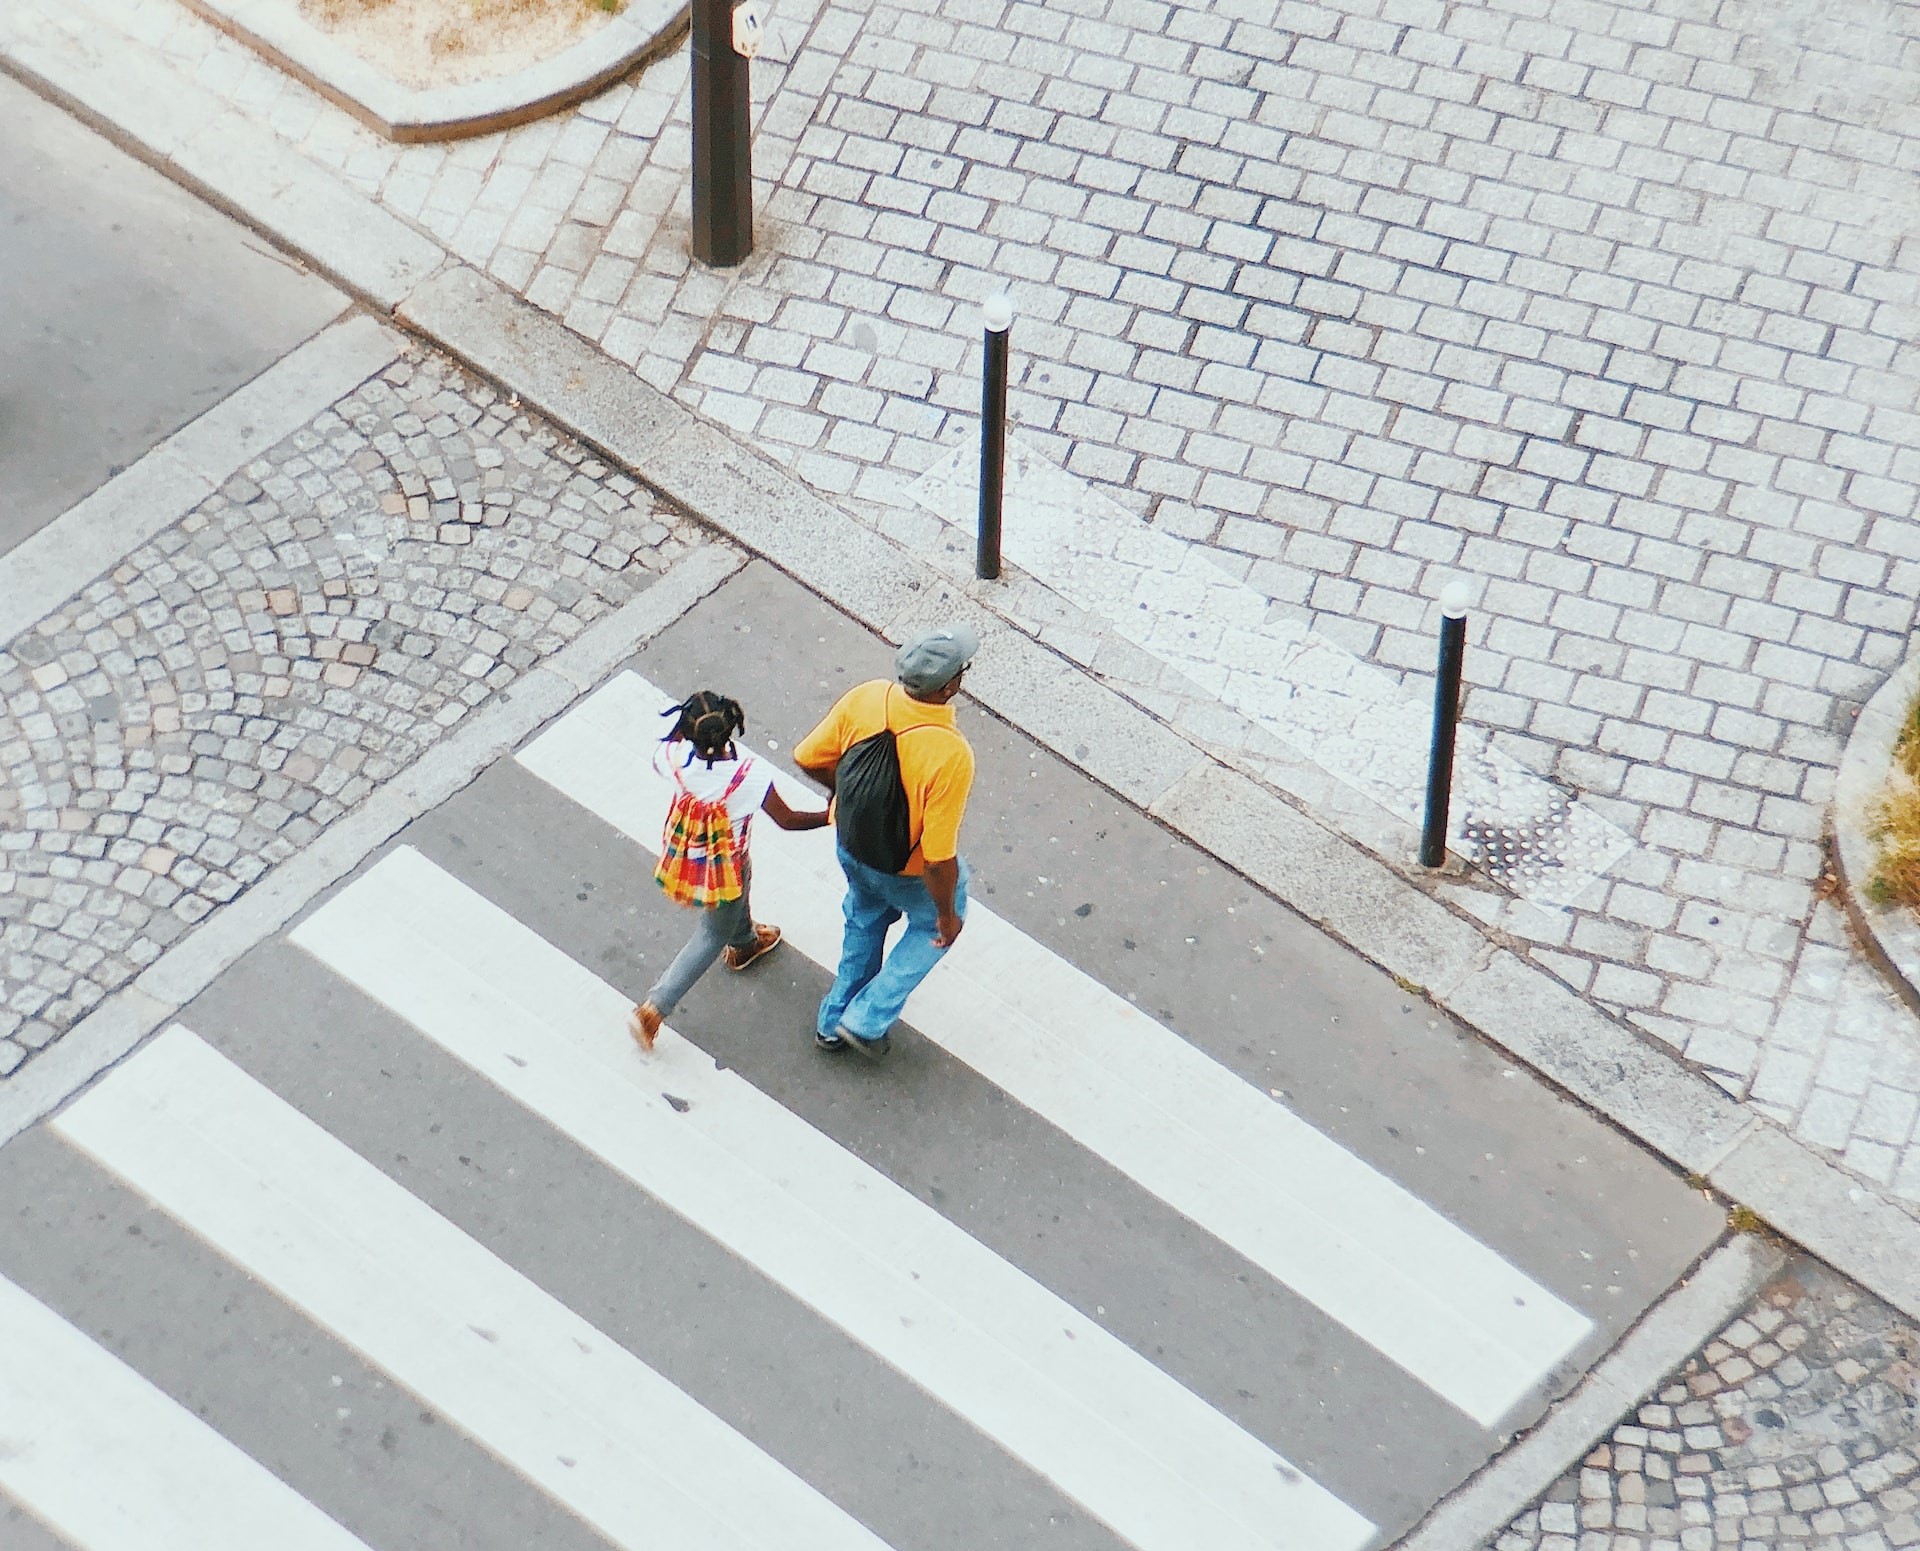 adult and child on a pedestrian crossing